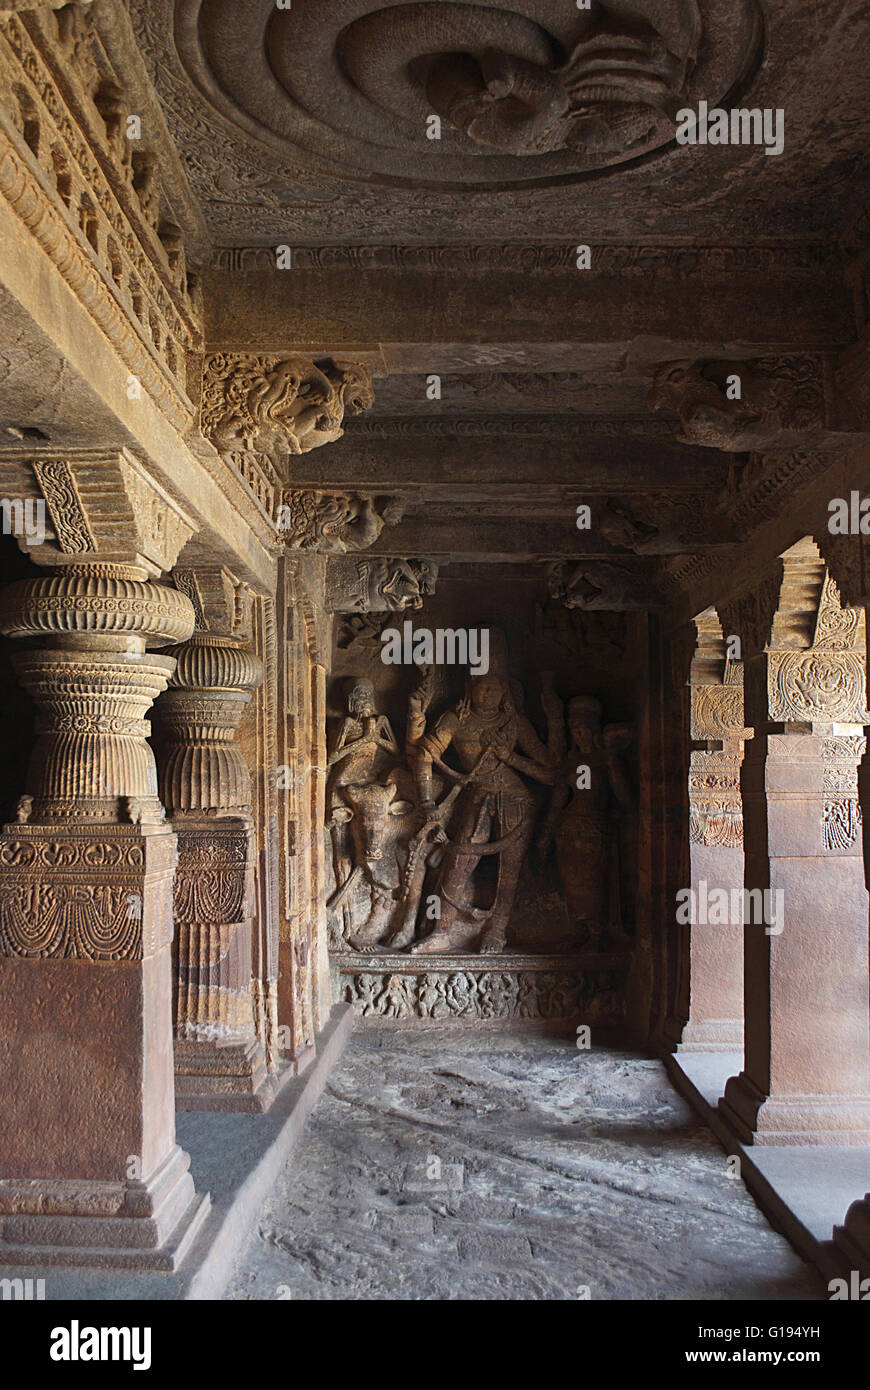 Cave 1: A sculpture depicting Nandi, the bull, Bhringi, a devotee of Shiva; a female decorated goddess, all of which are part of Stock Photo